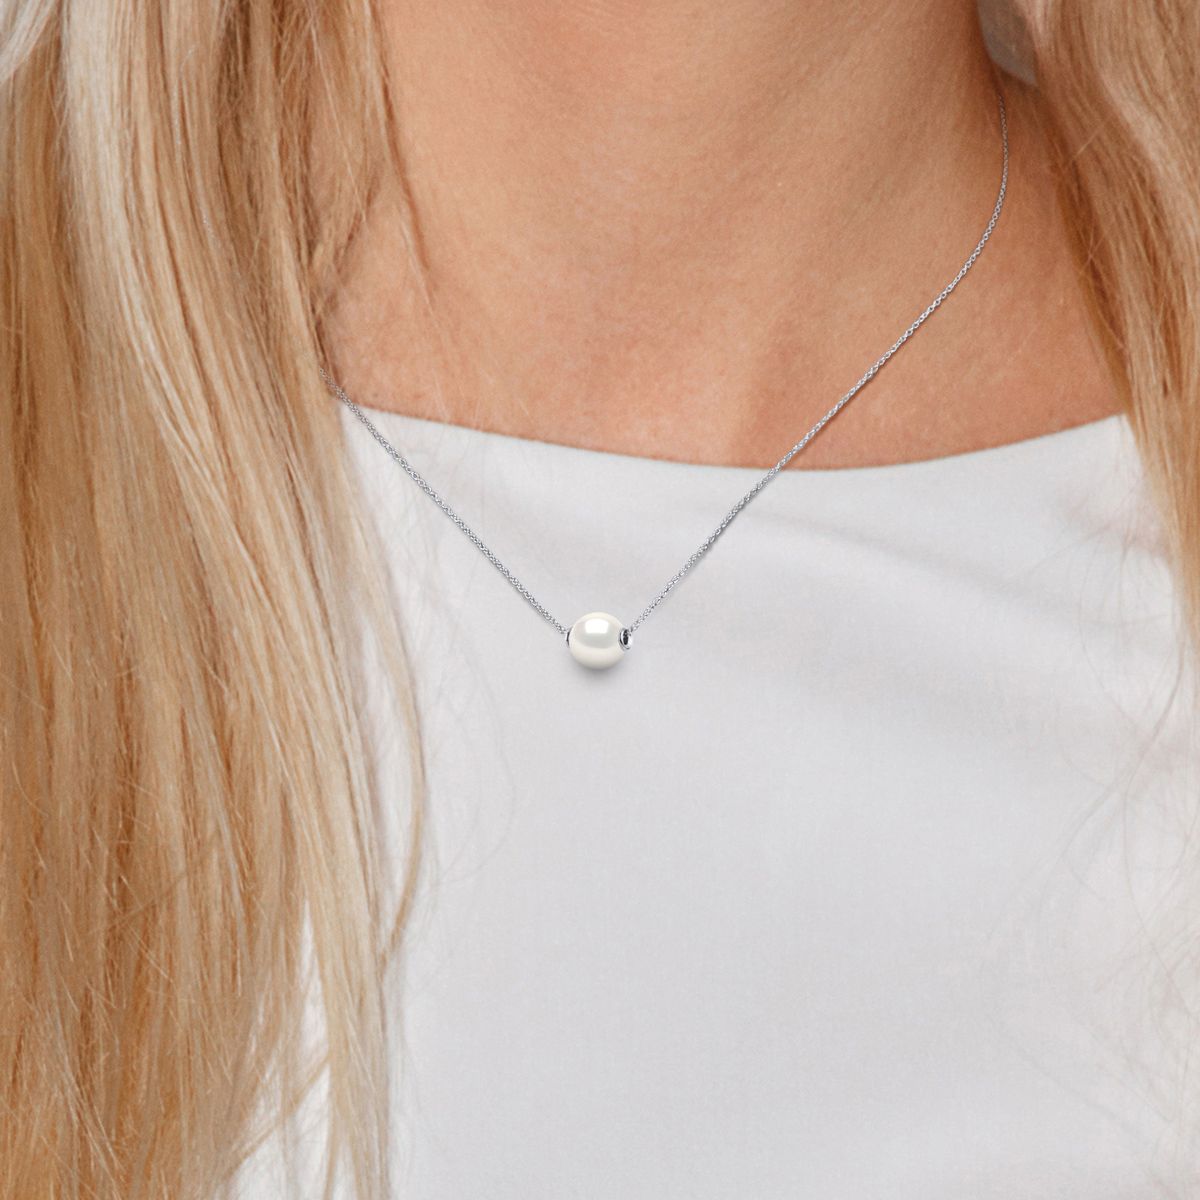 Necklace in chain mesh 925 Sterling Silver Rhodium-plated and true Cultured Freshwater Pearls 10-11 mm - Natural White Color Length 42 cm , 16,5 in - Our jewellery is made in France and will be delivered in a gift box accompanied by a Certificate of Authenticity and International Warranty